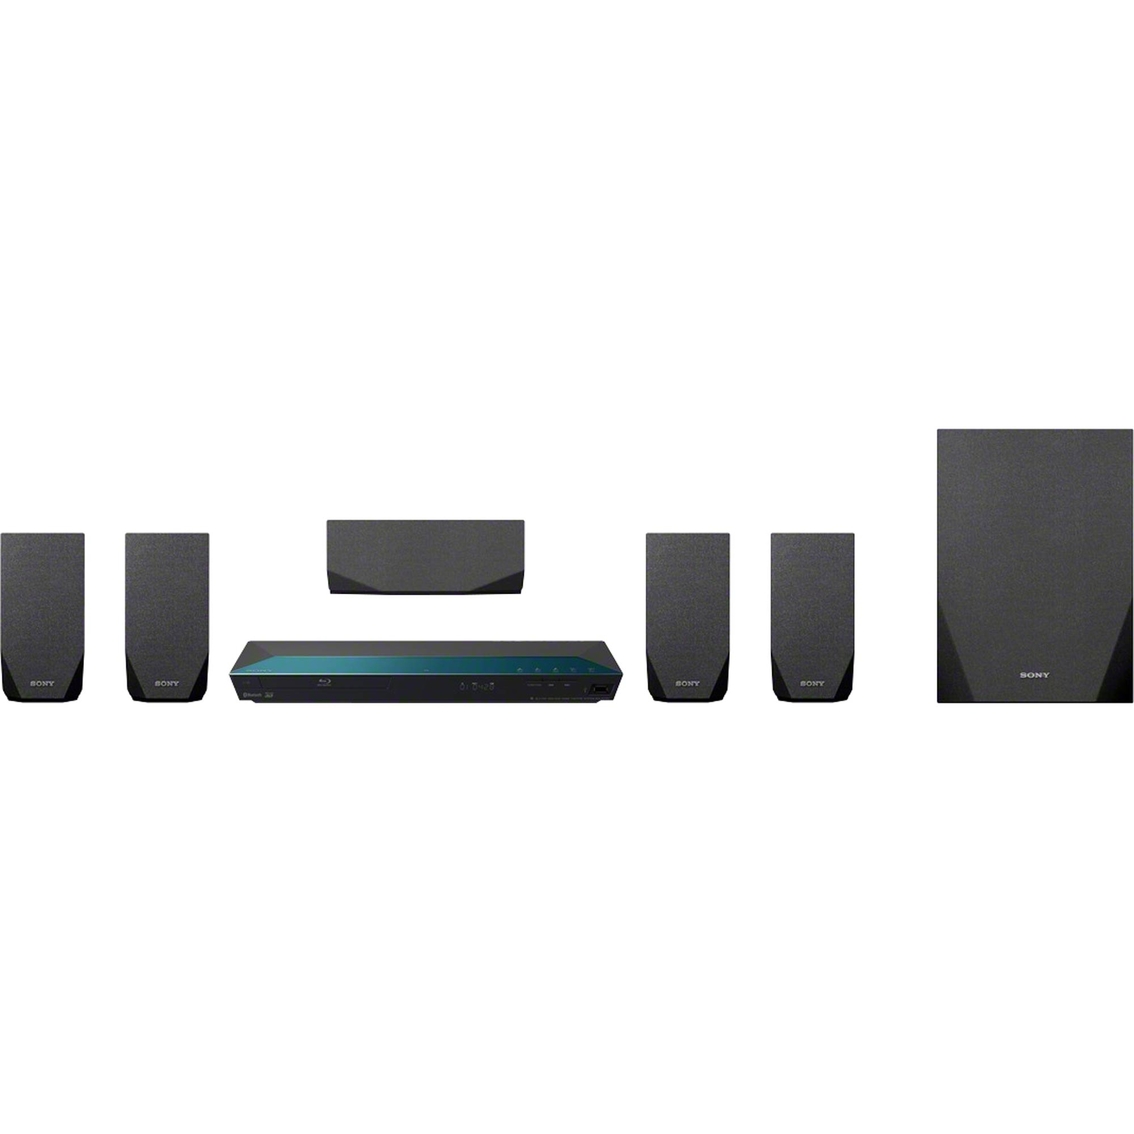 Sony Home Theater System | Speakers 